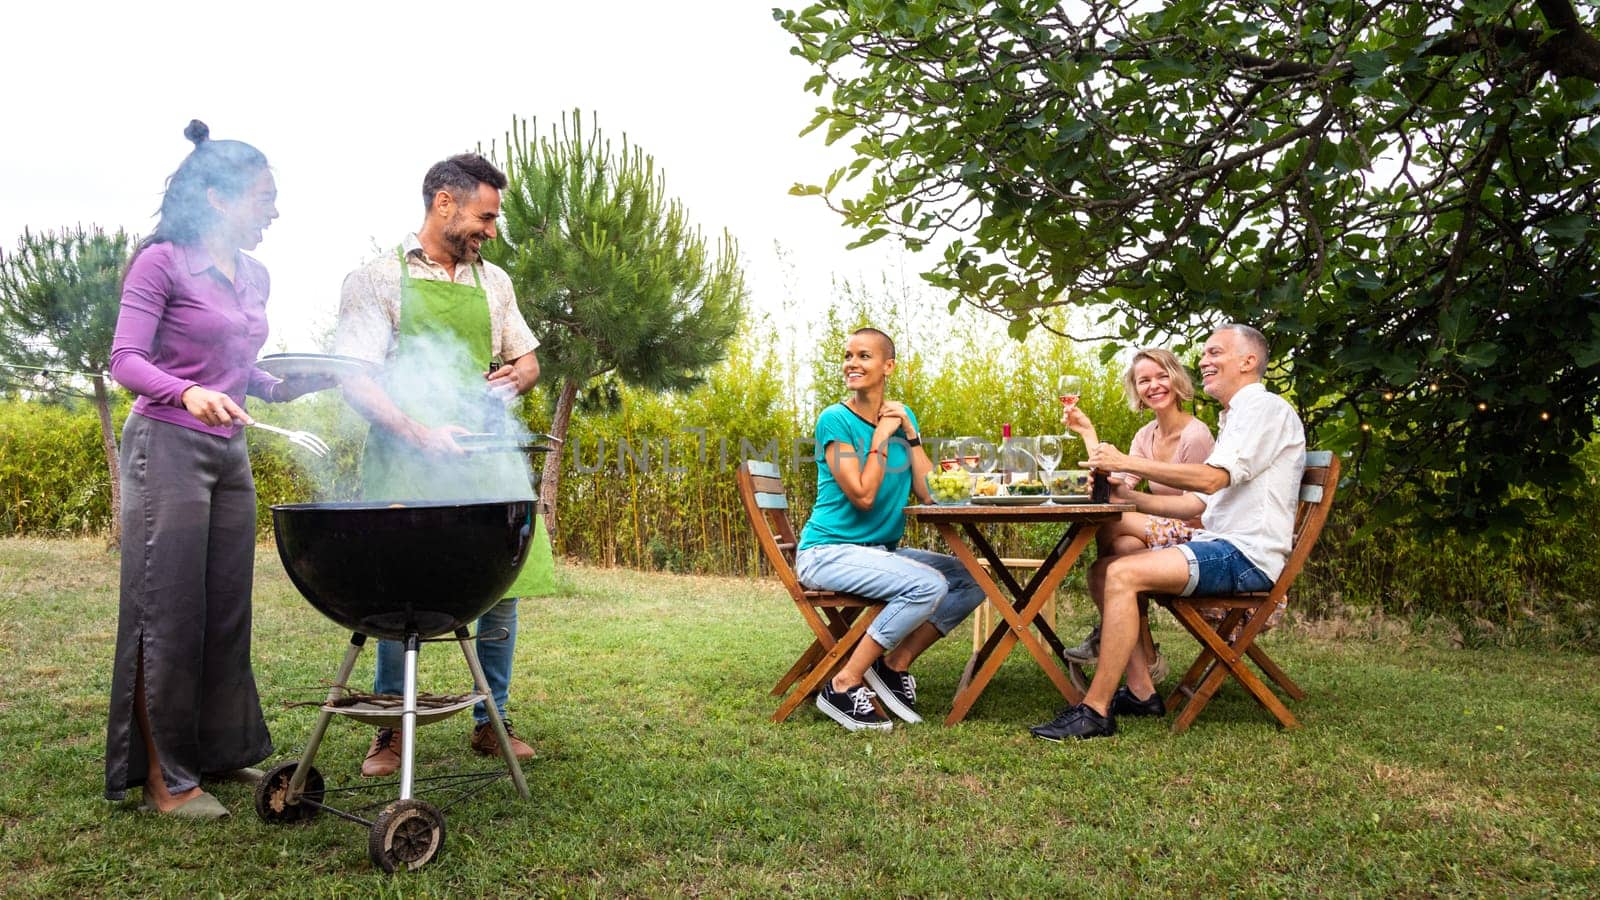 Multiracial couple cooking food on grill for friends. Outdoor garden barbecue party. Friends laughing and having fun, enjoying wine in backyard. Lifestyle.